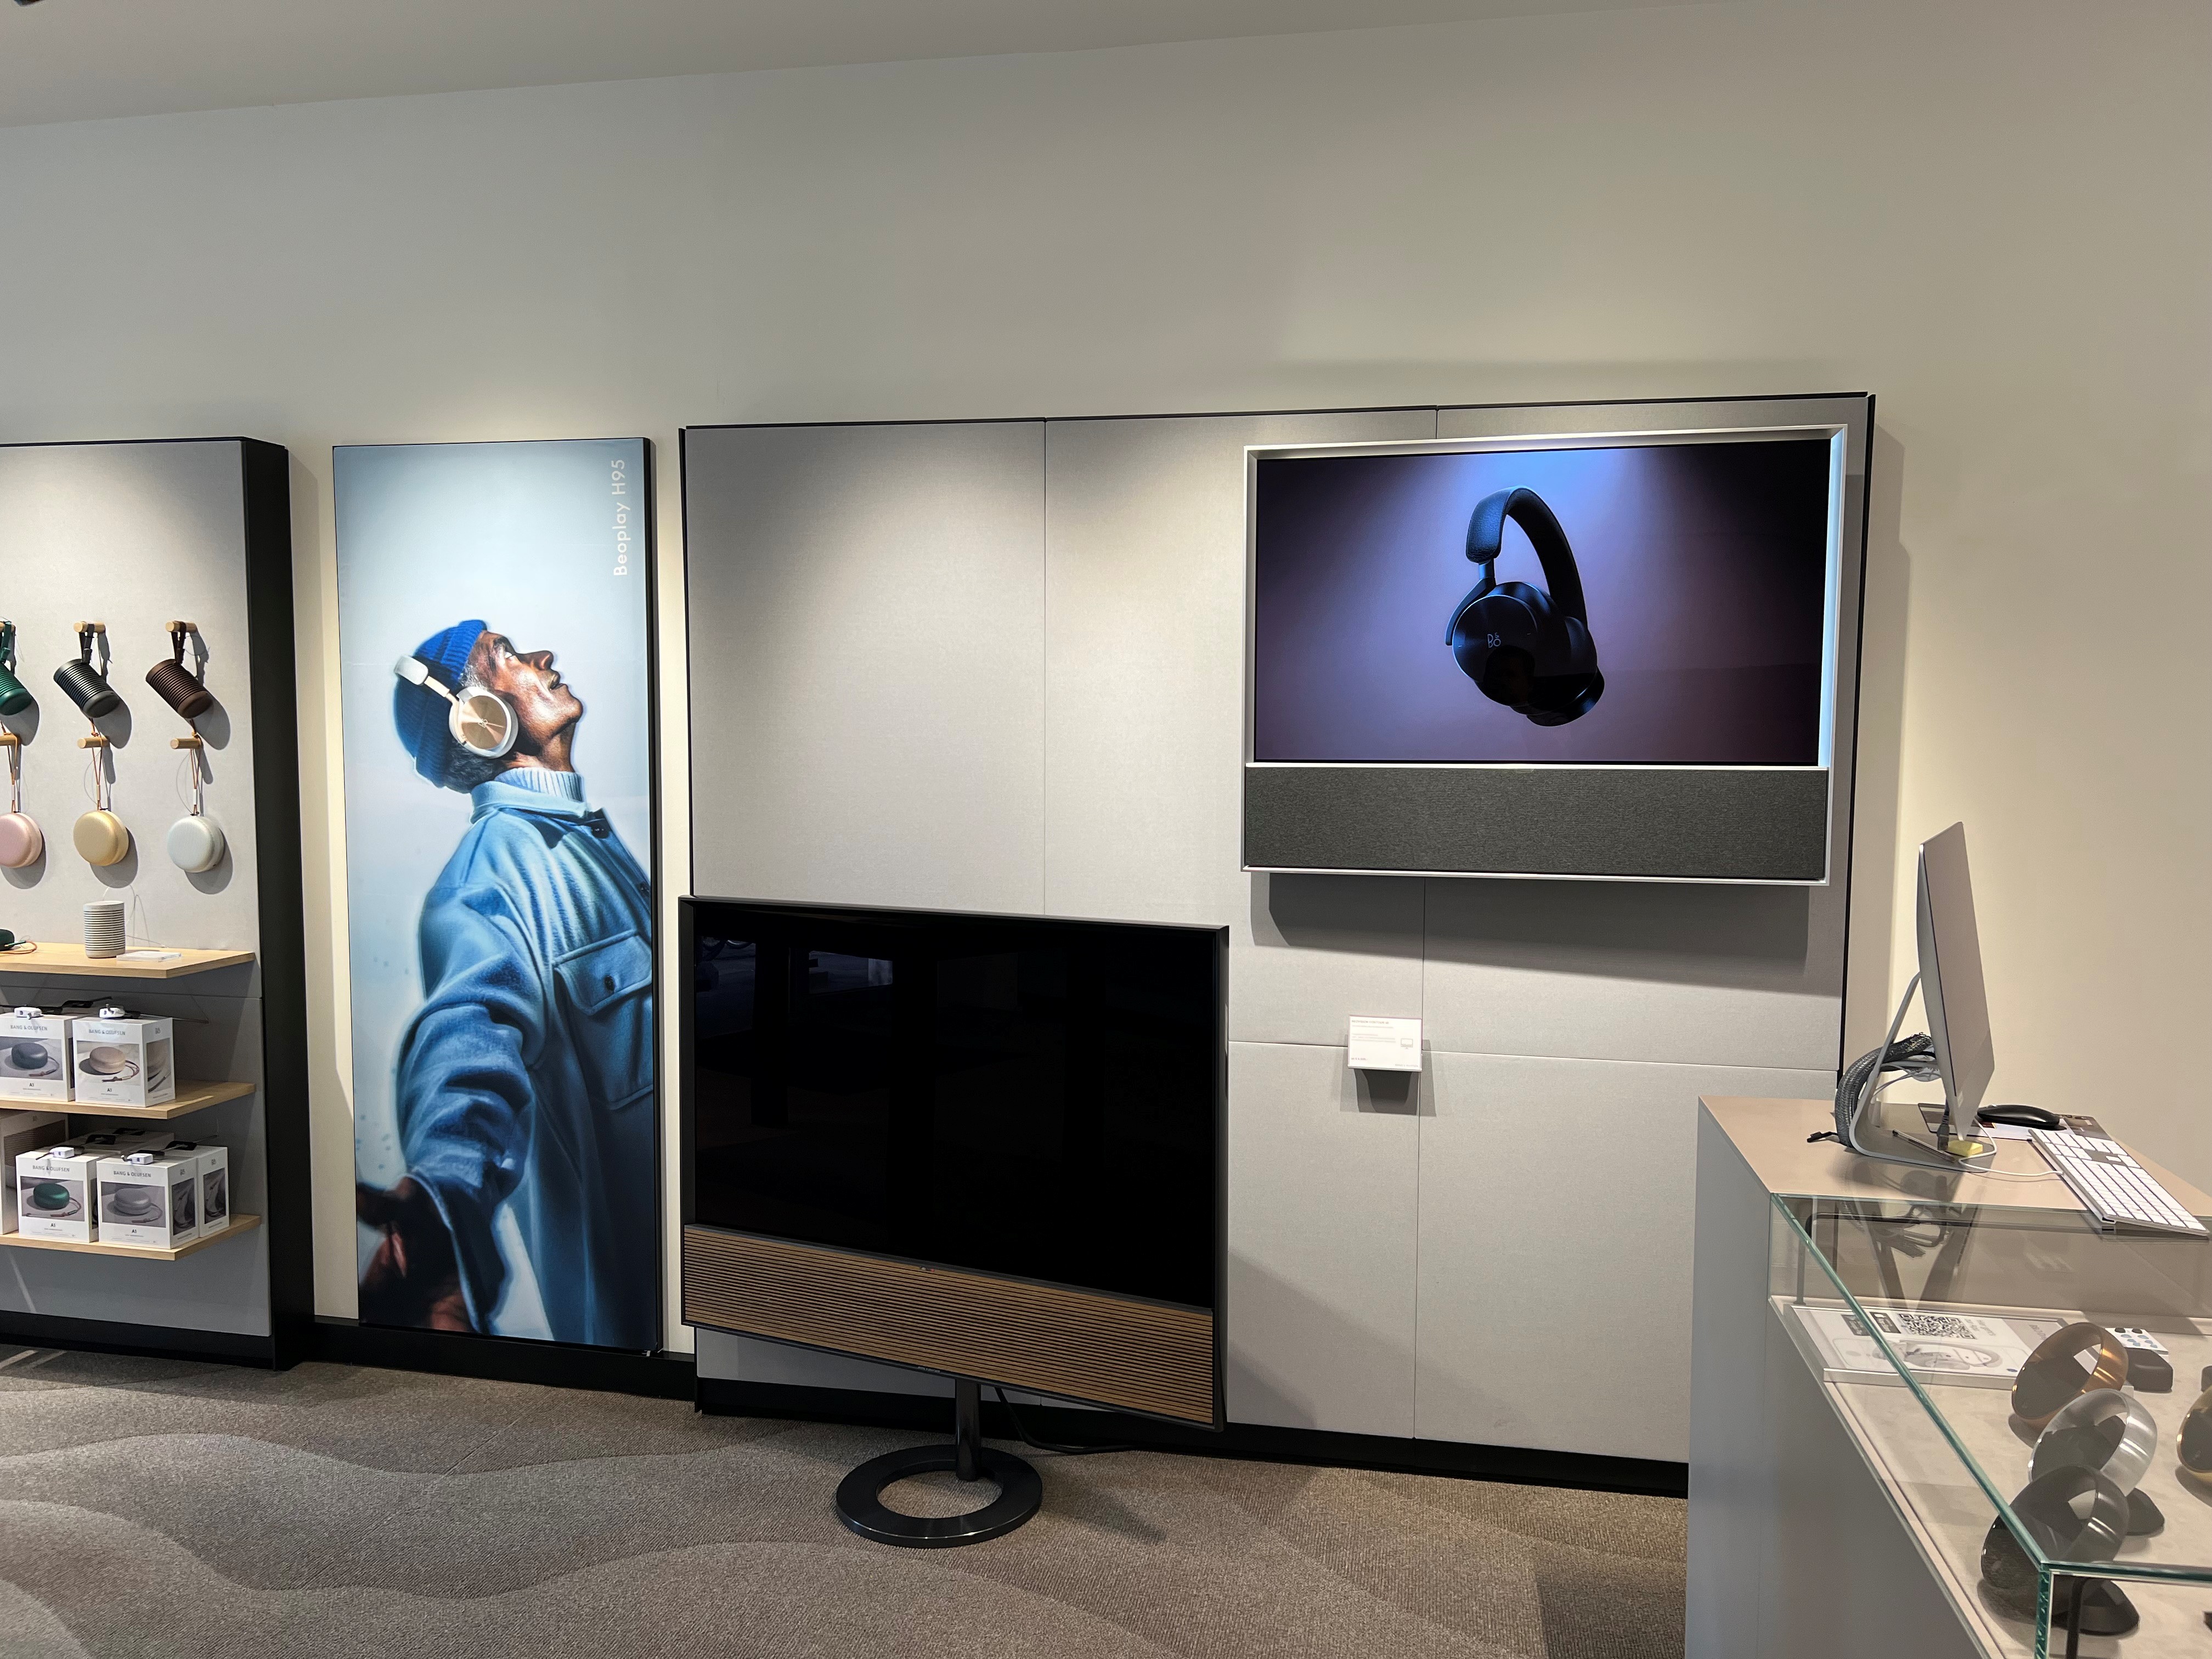 Bang & Olufsen : Luxury home sound systems in Münster